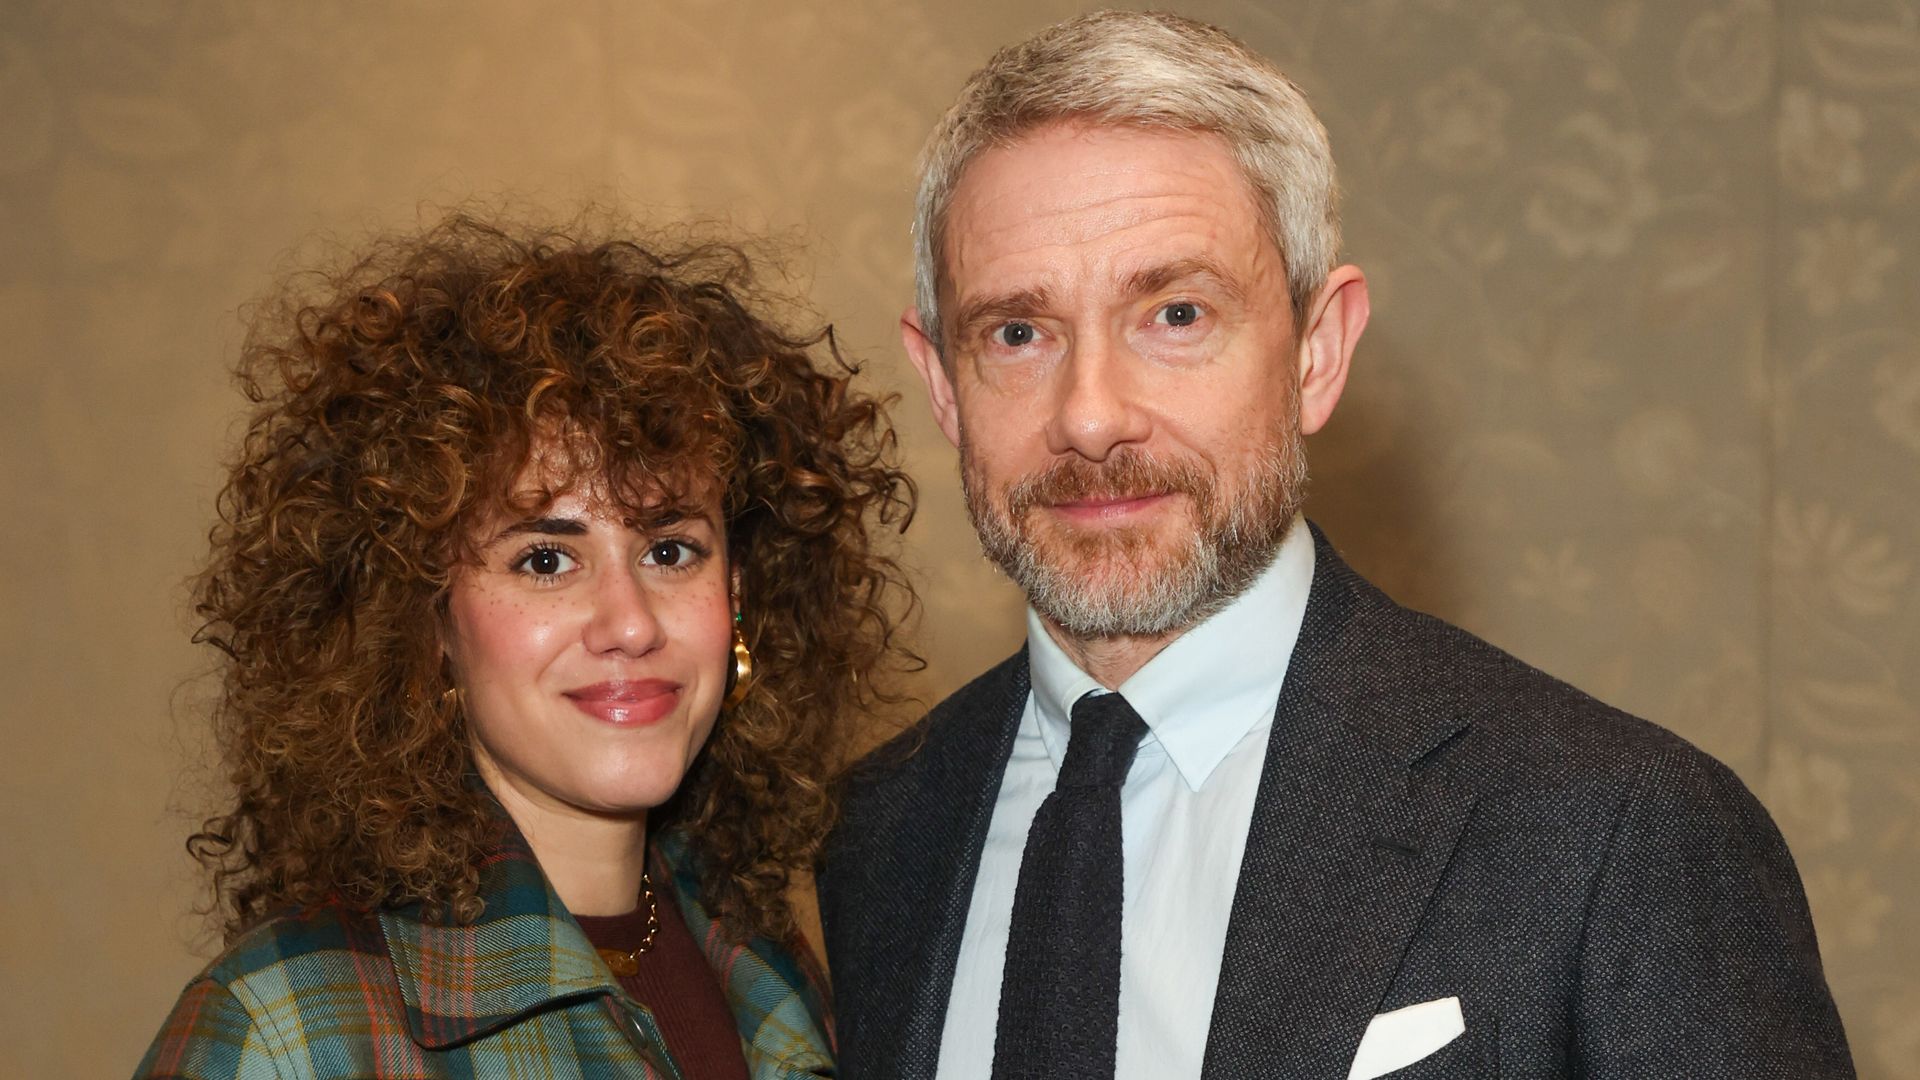 Rachel Mariam and Martin Freeman attend the gala performance after party for "Plaza Suite" at The Savoy Hotel on January 28, 2024 in London, England